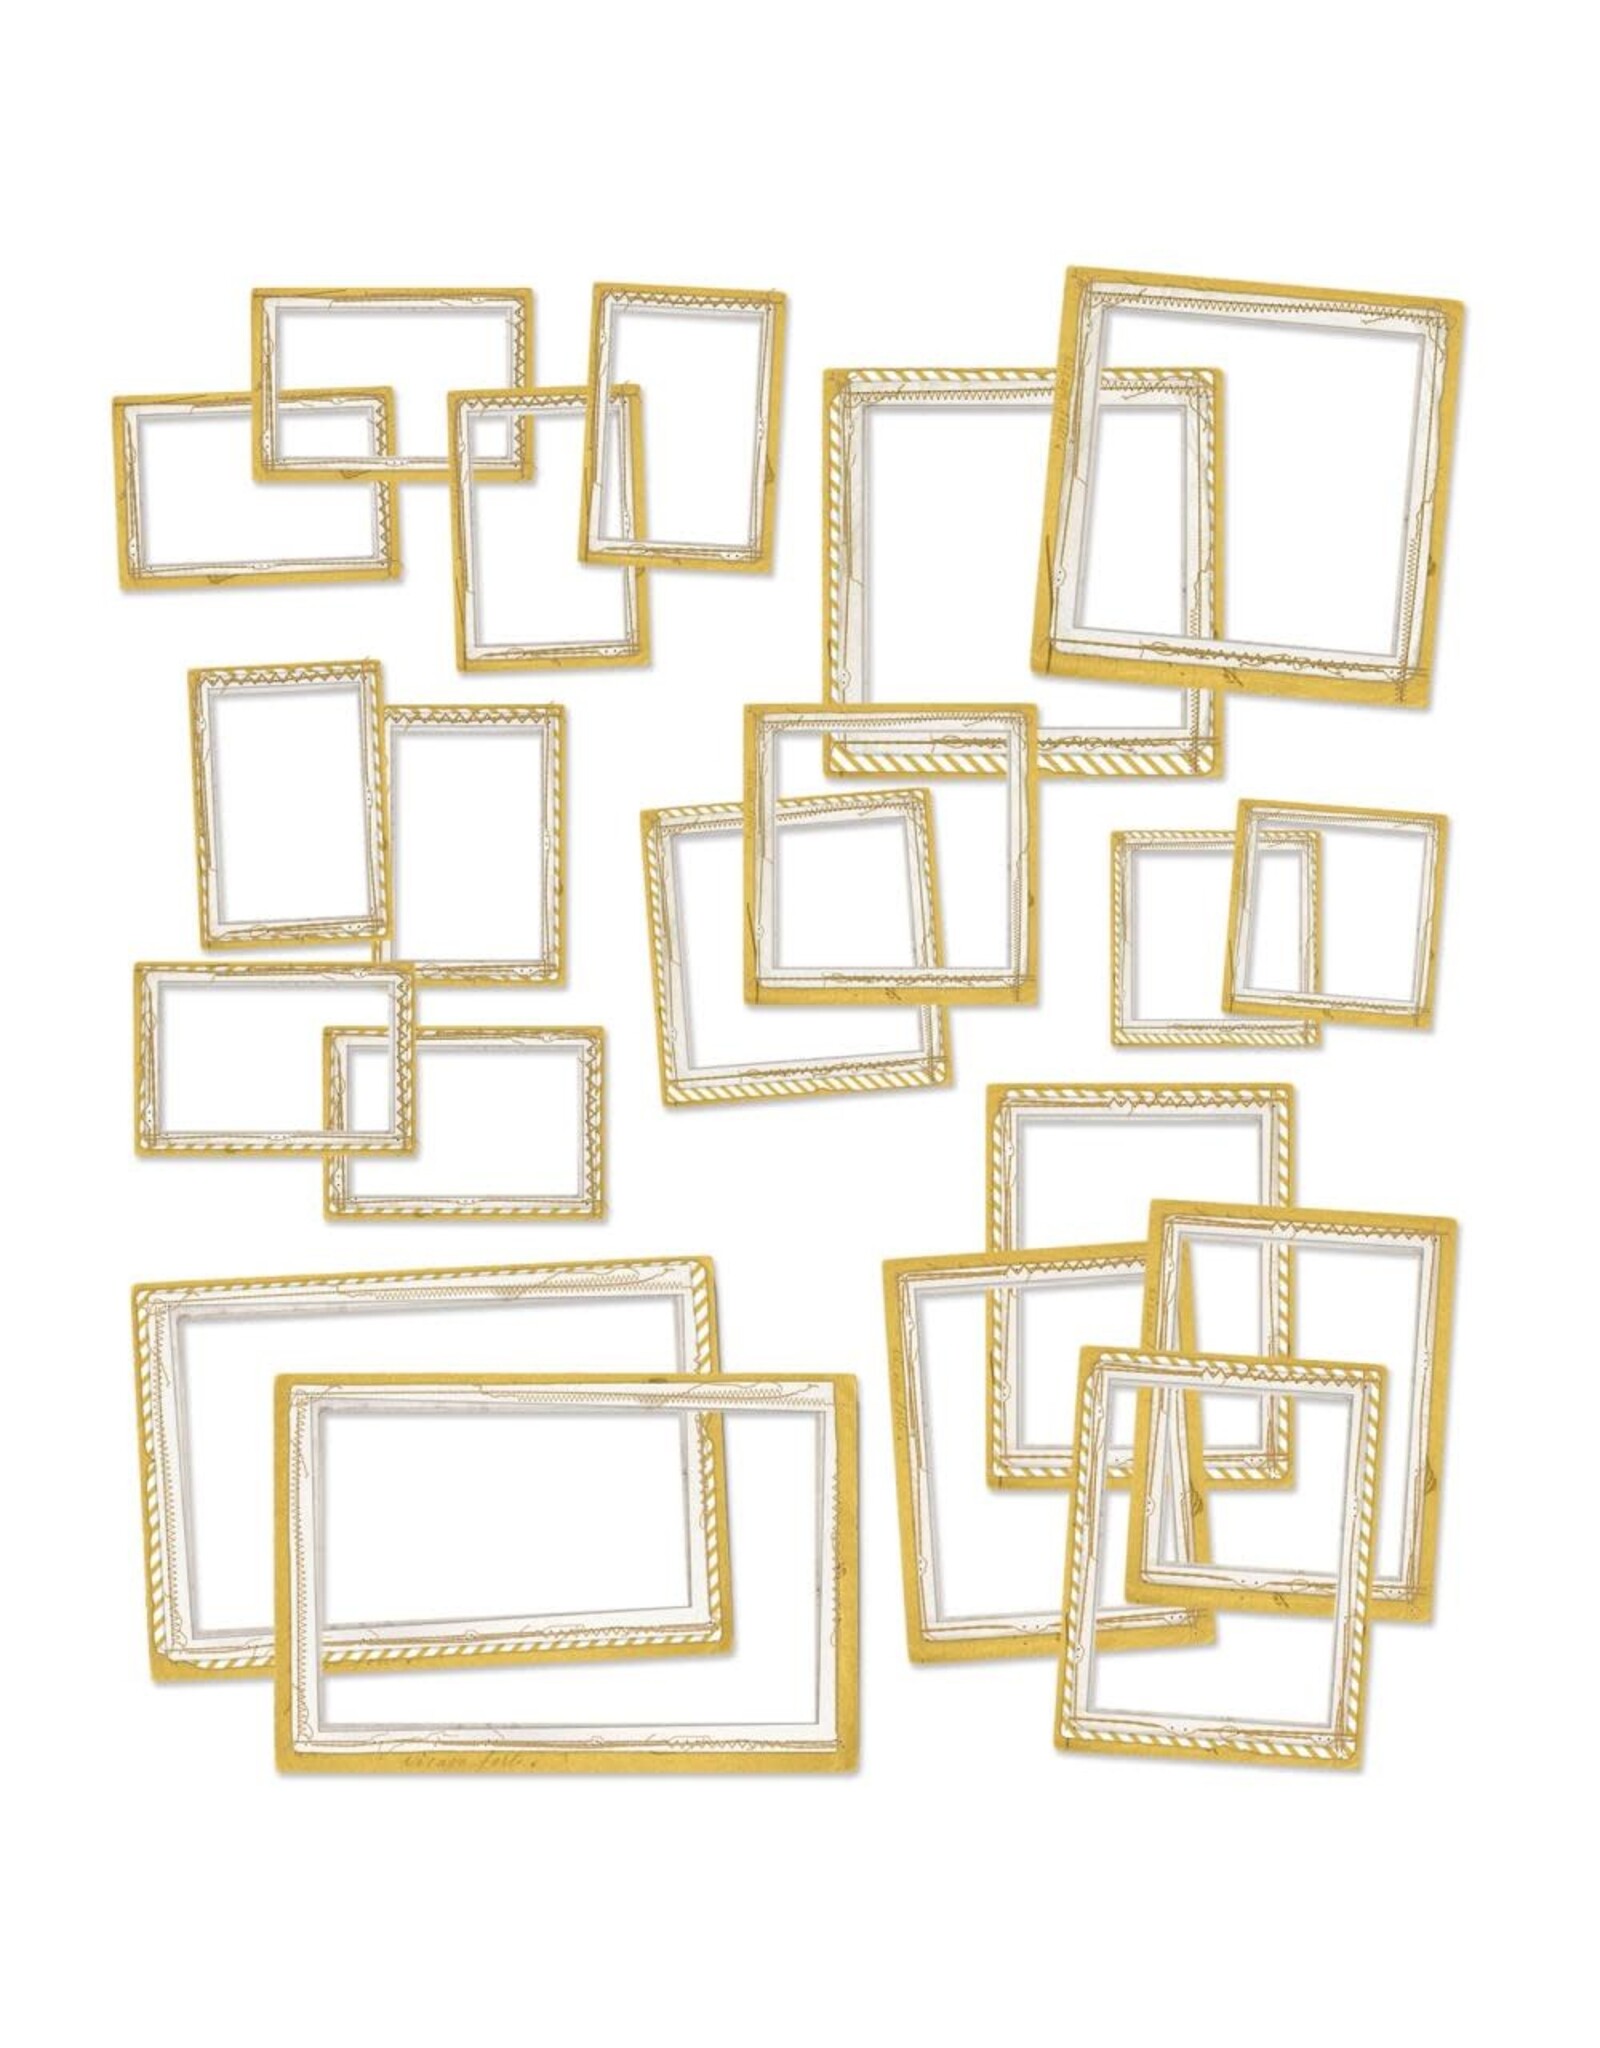 49 AND MARKET 49 AND MARKET COLOR SWATCH OCHRE FRAME SET 20 PIECES